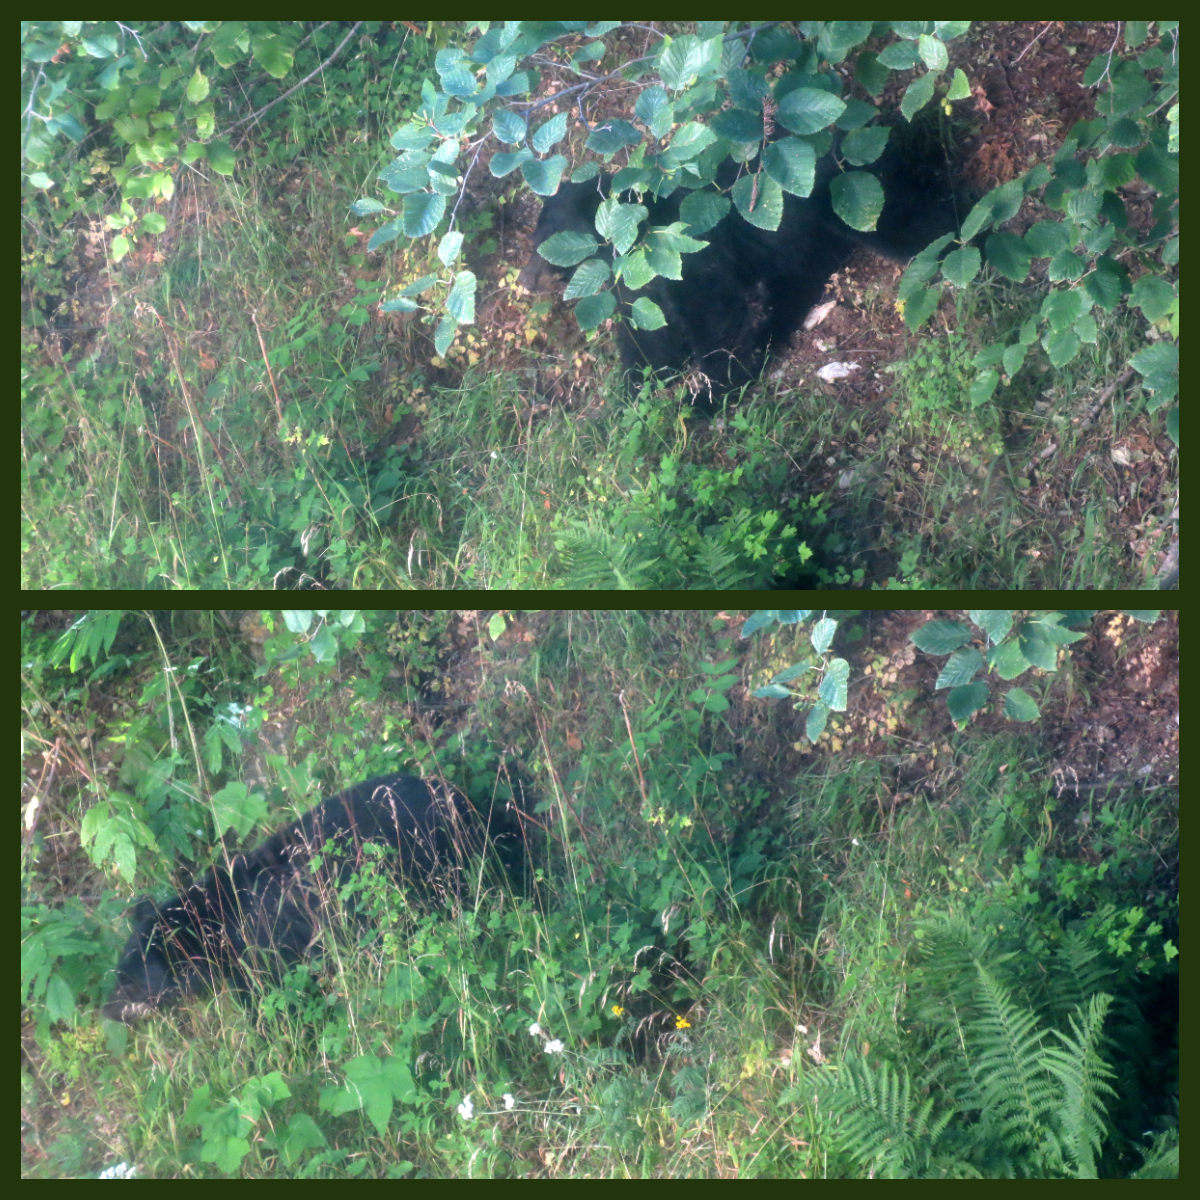 two views of a black bear ambling through some weeds